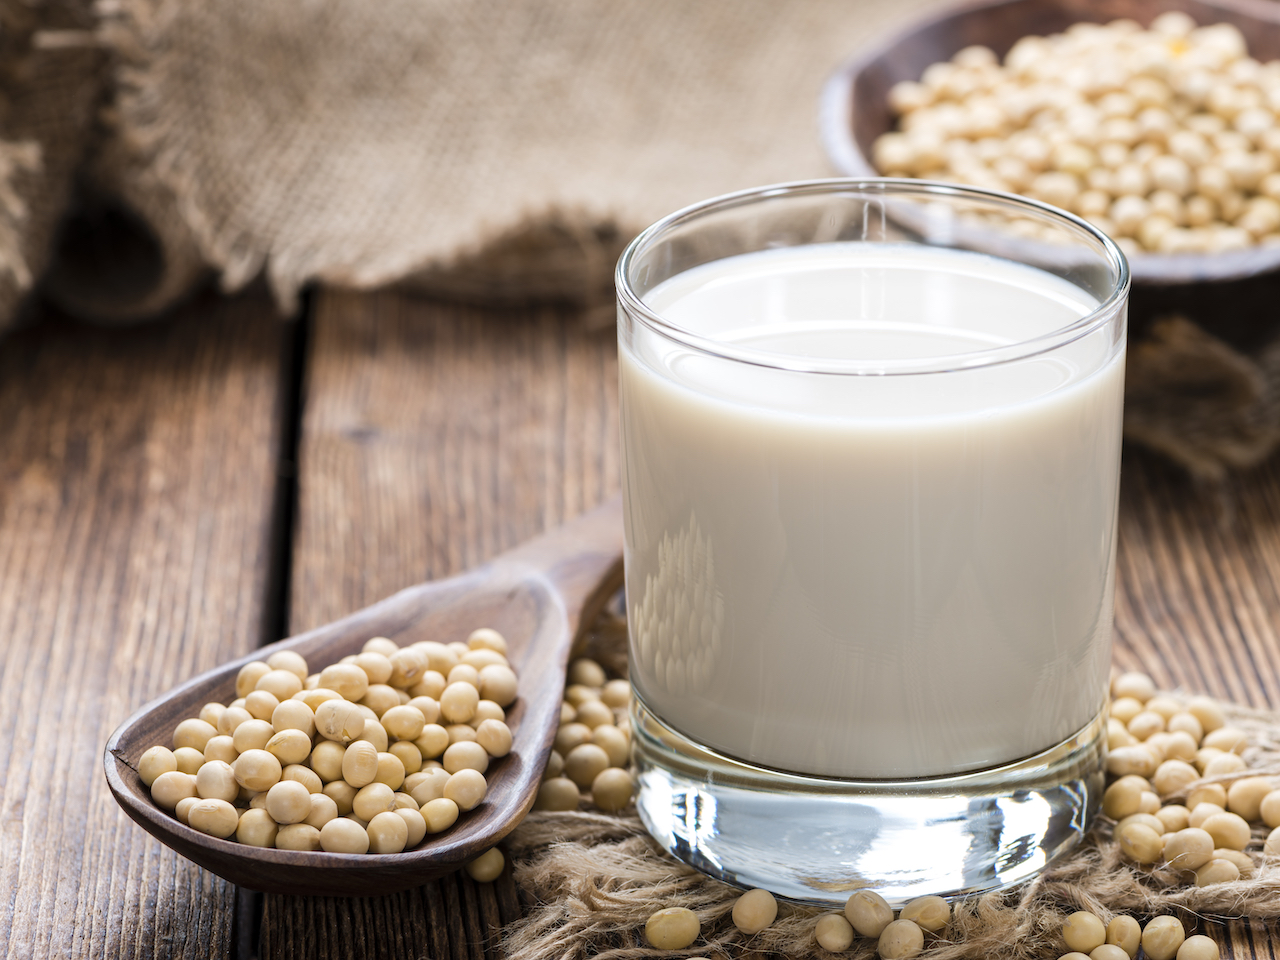 Glass with Soy Milk and Seeds on wooden background